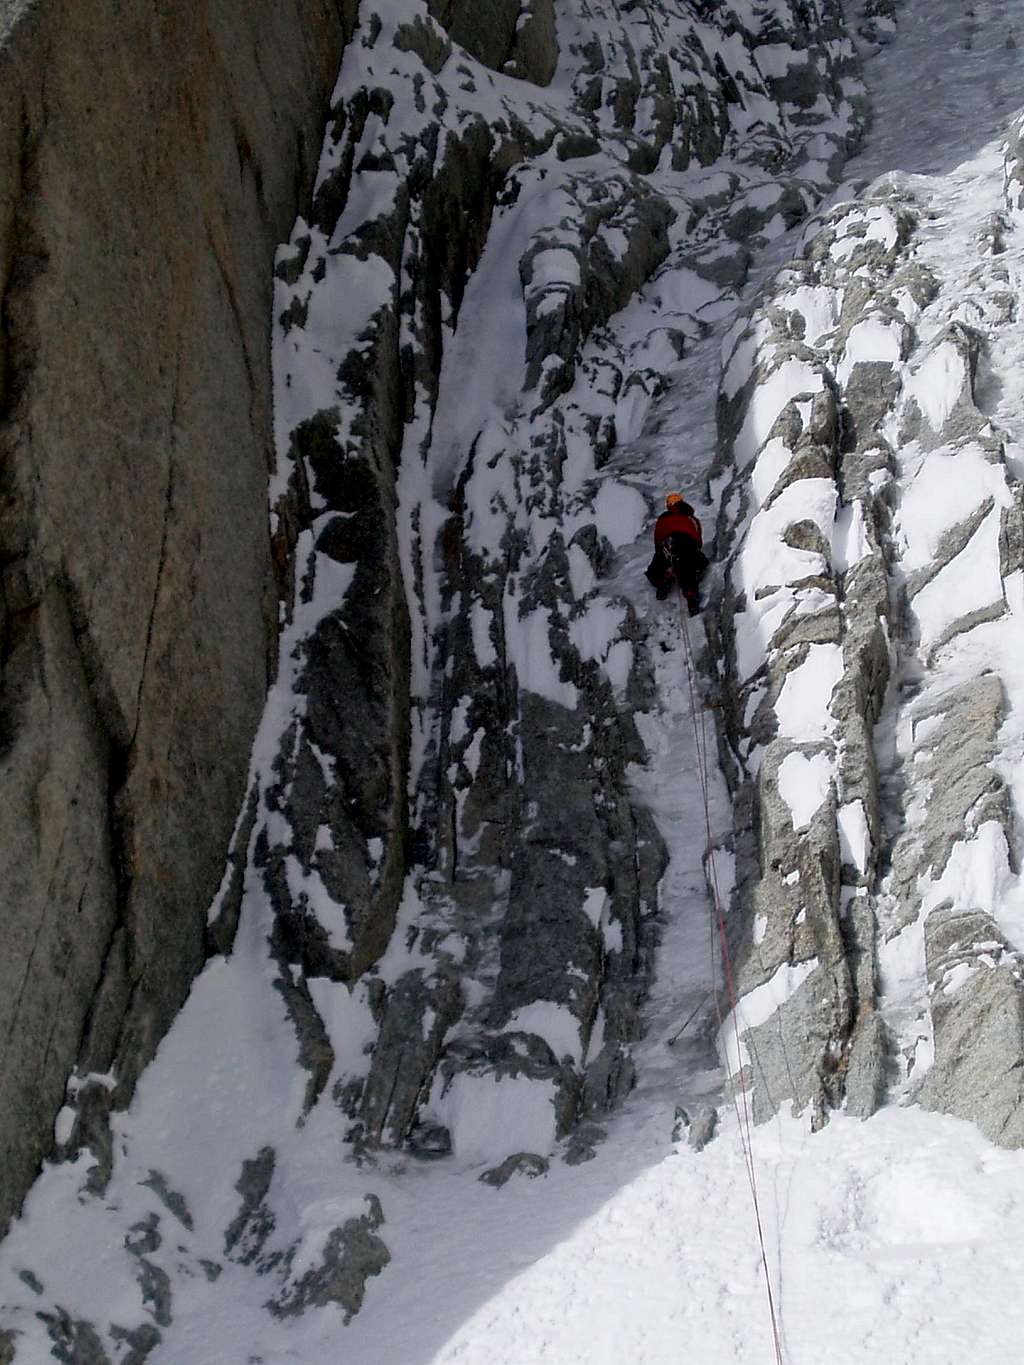 first pitch up the main gully